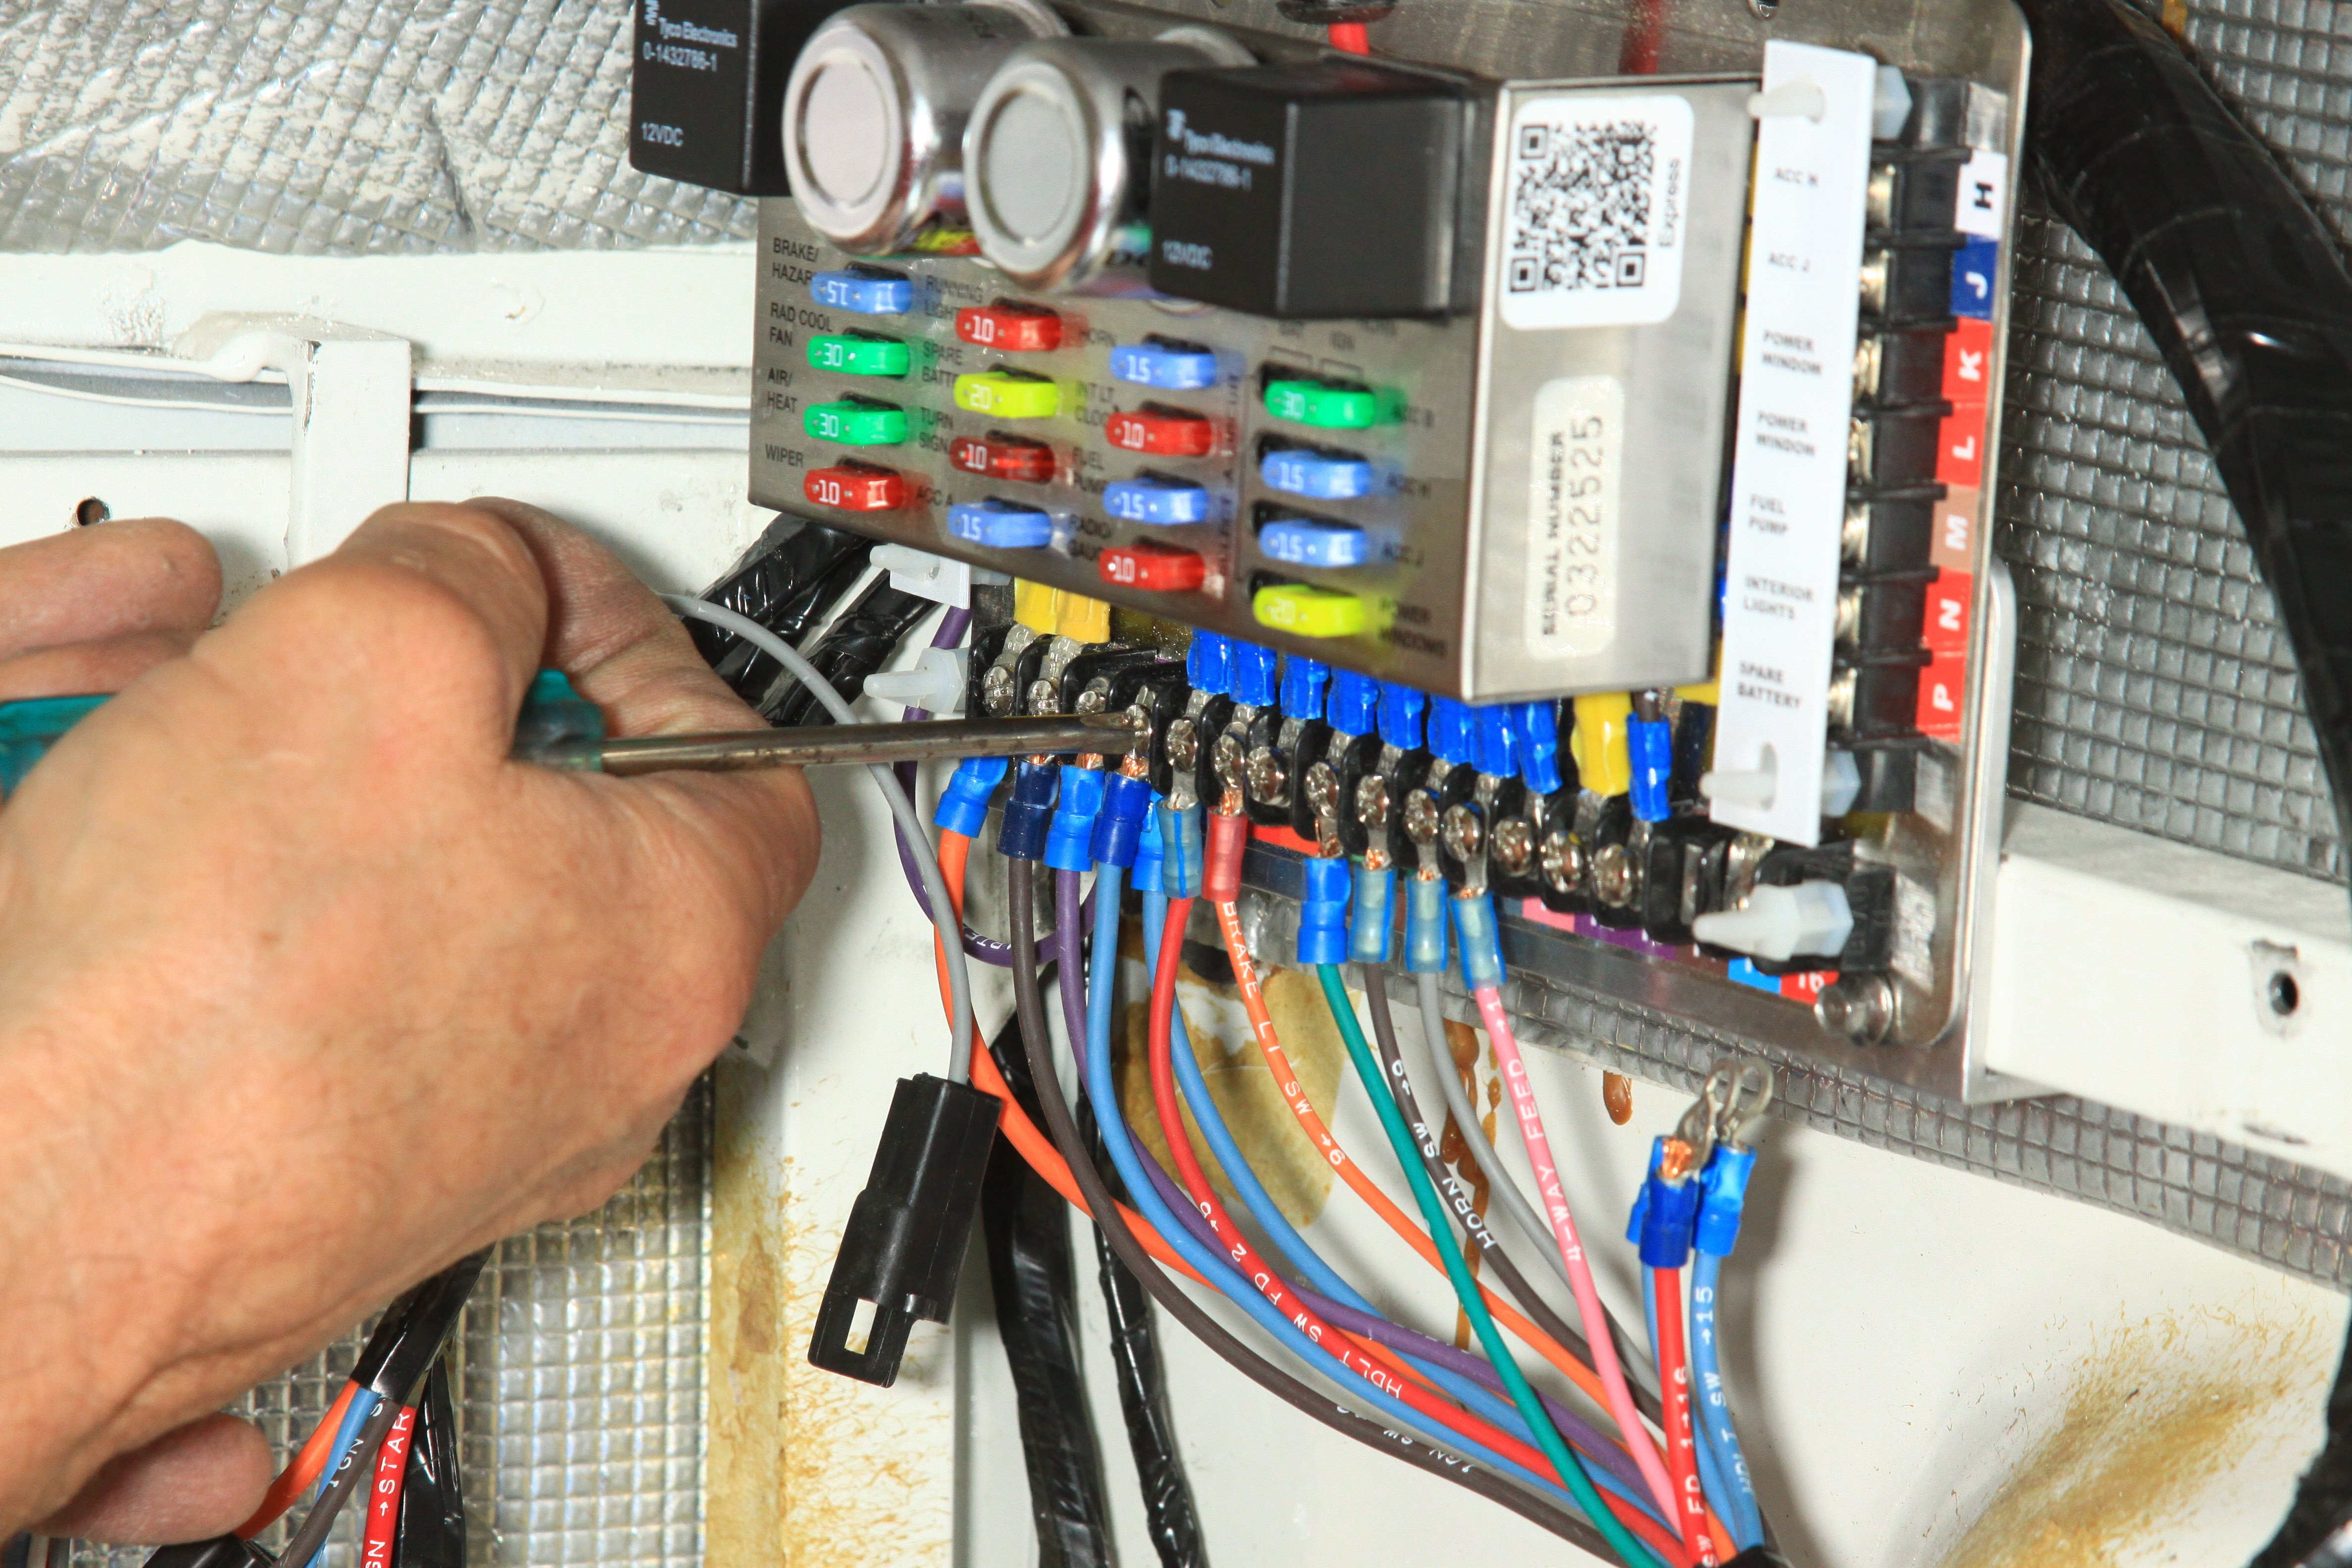 Ron Francis Wiring Takes The Guess Work, Ron Francis Wiring Schematic